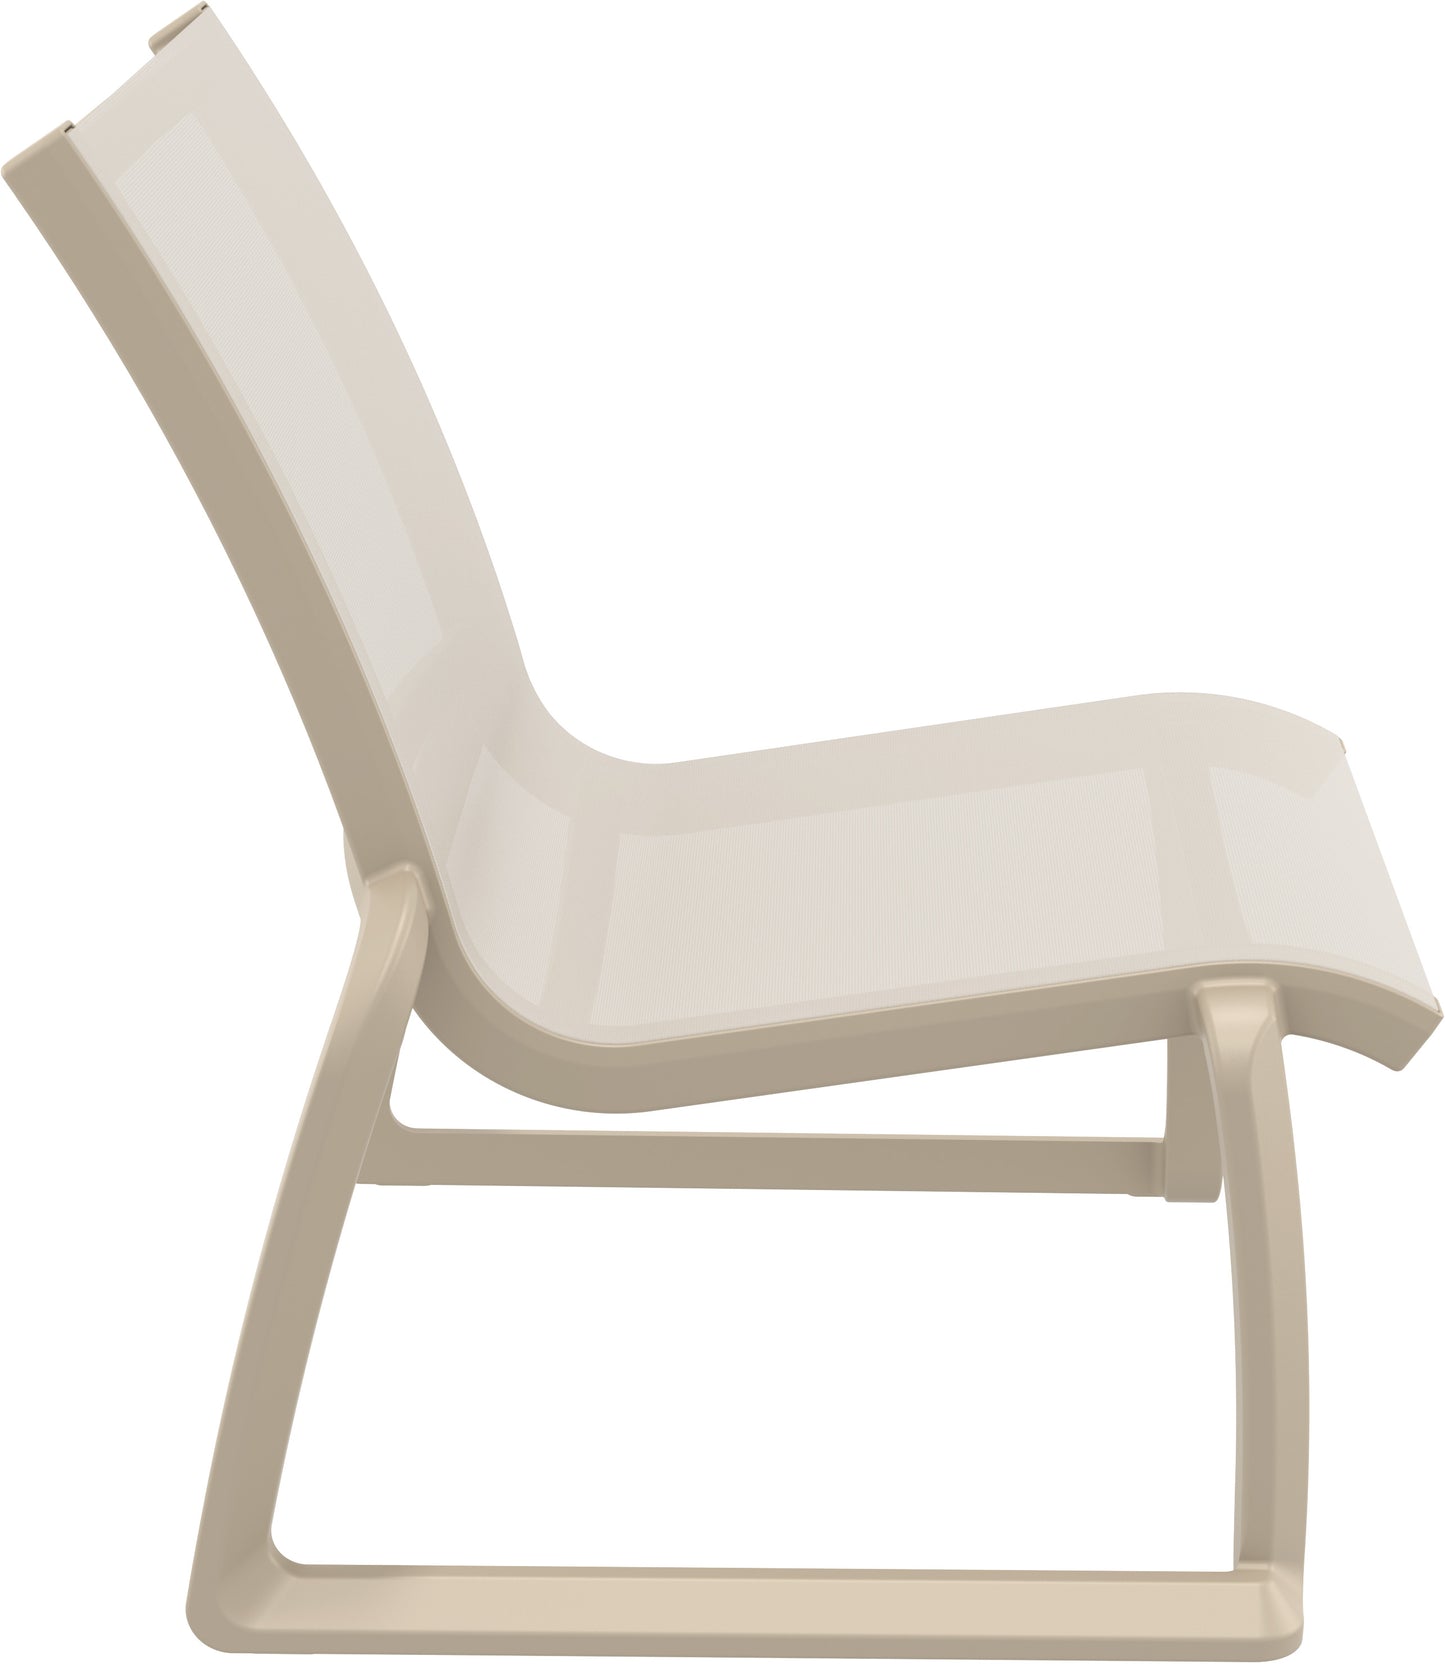 Coolum Outdoor Lounge Chair - Latte